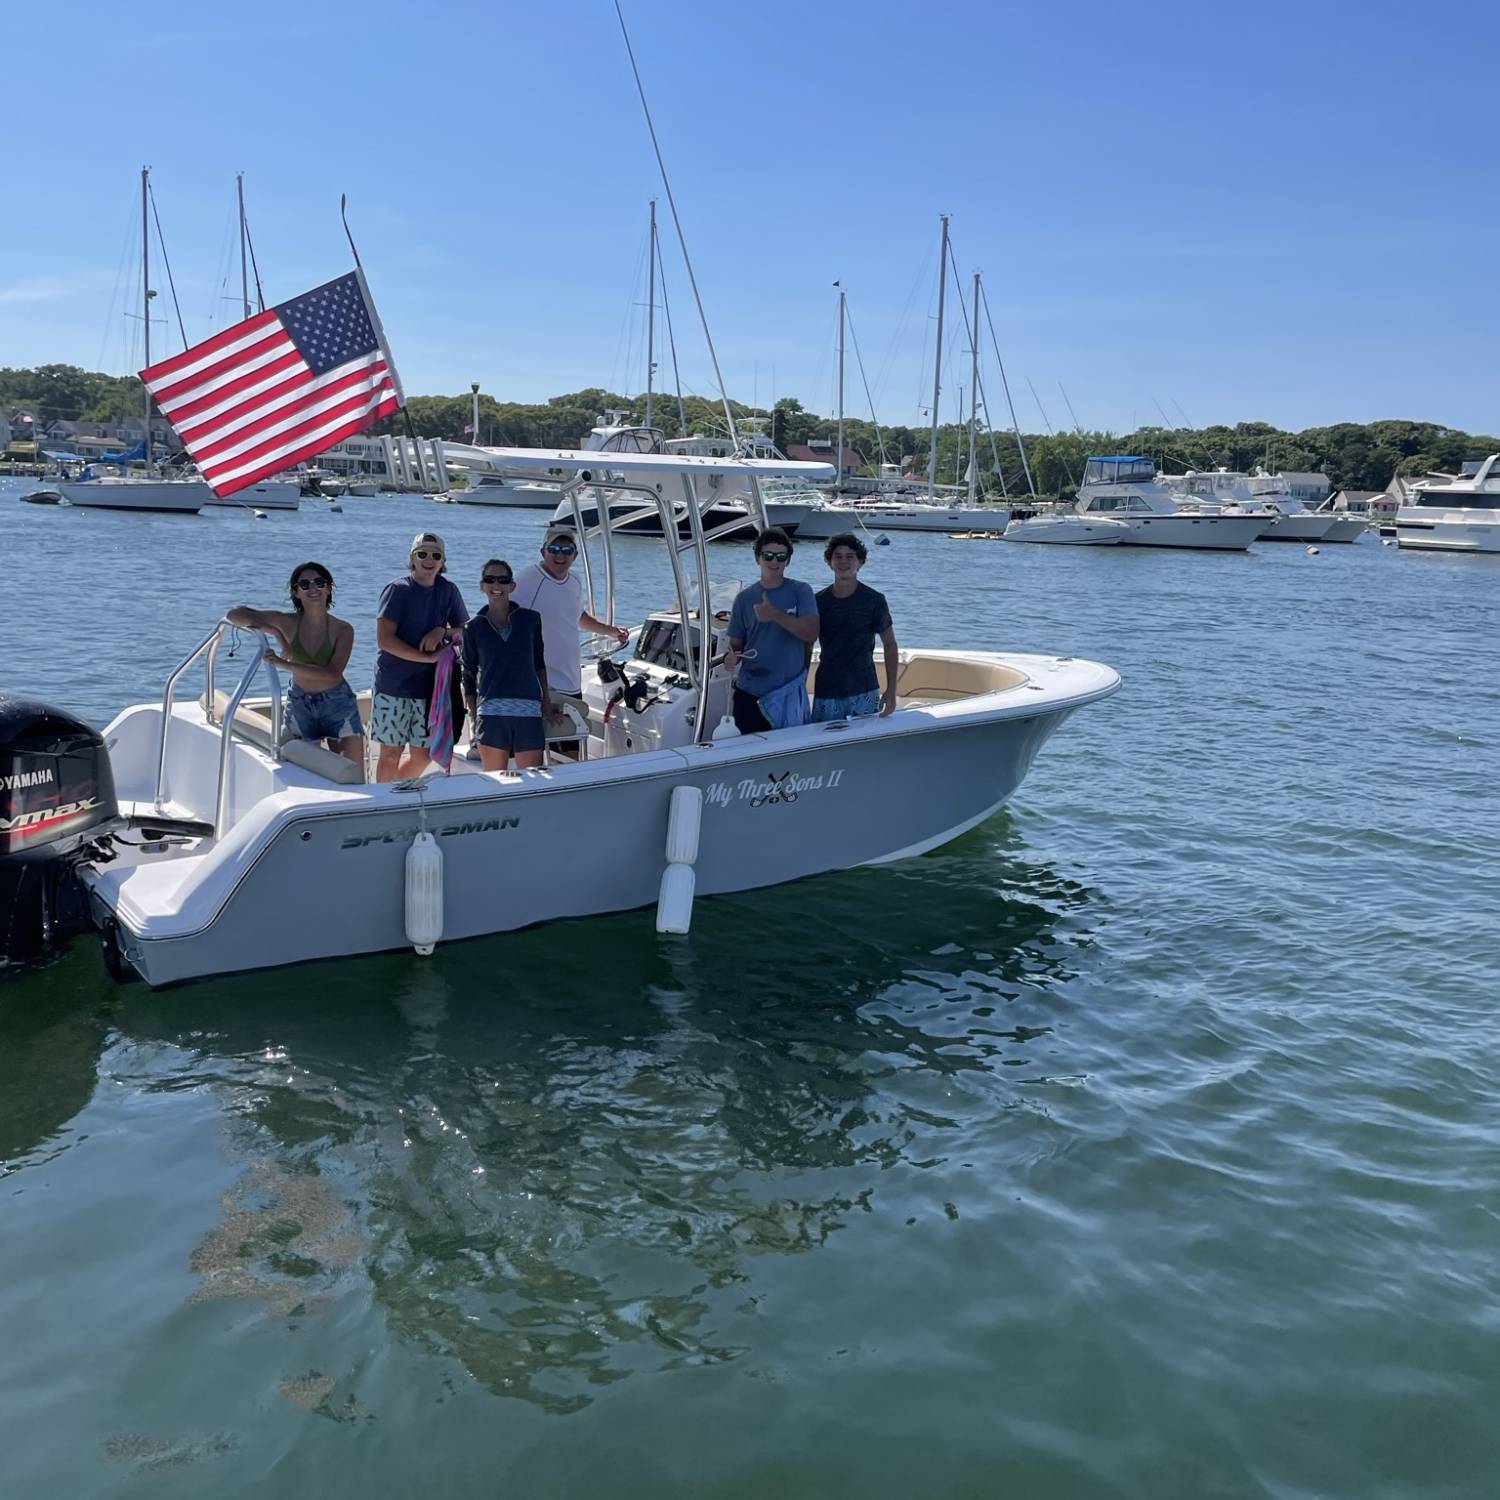 Title: Family Picture - On board their Sportsman Heritage 231 Center Console - Location: Oak Bluffs Martha’s Vineyard MA. Participating in the Photo Contest #SportsmanAugust